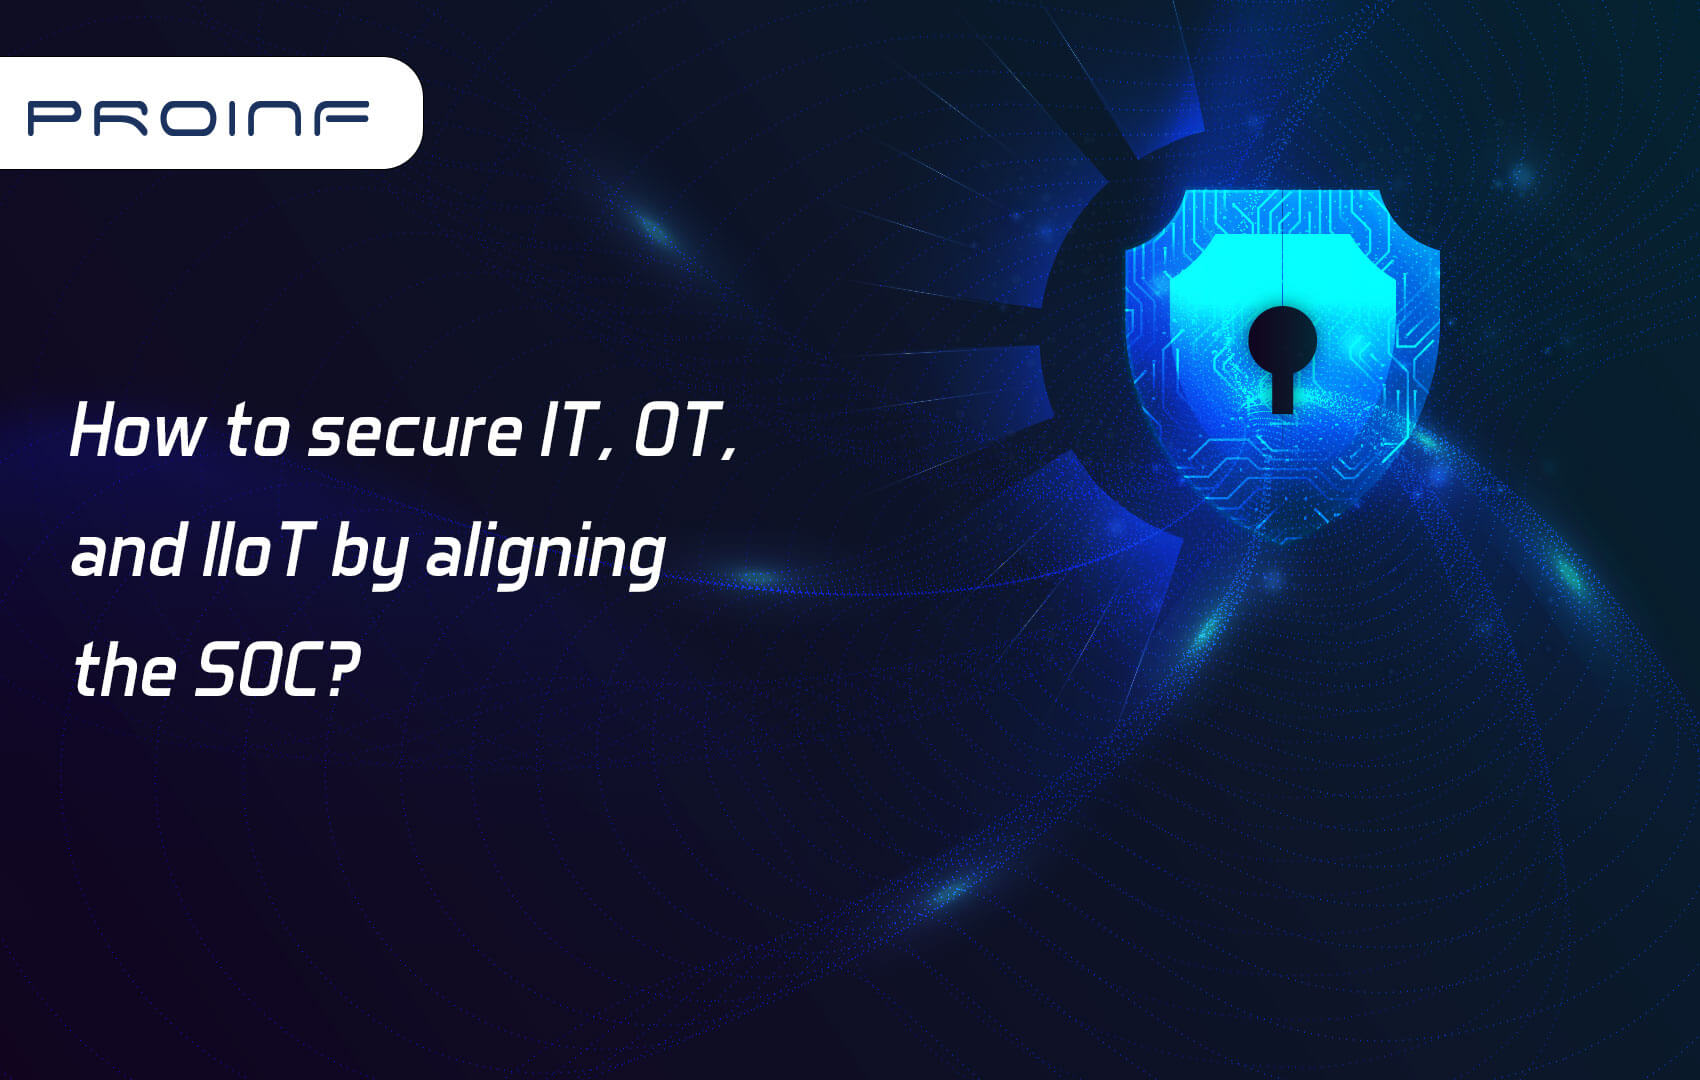 How to secure IT, OT, and IIoT by aligning the SOC?